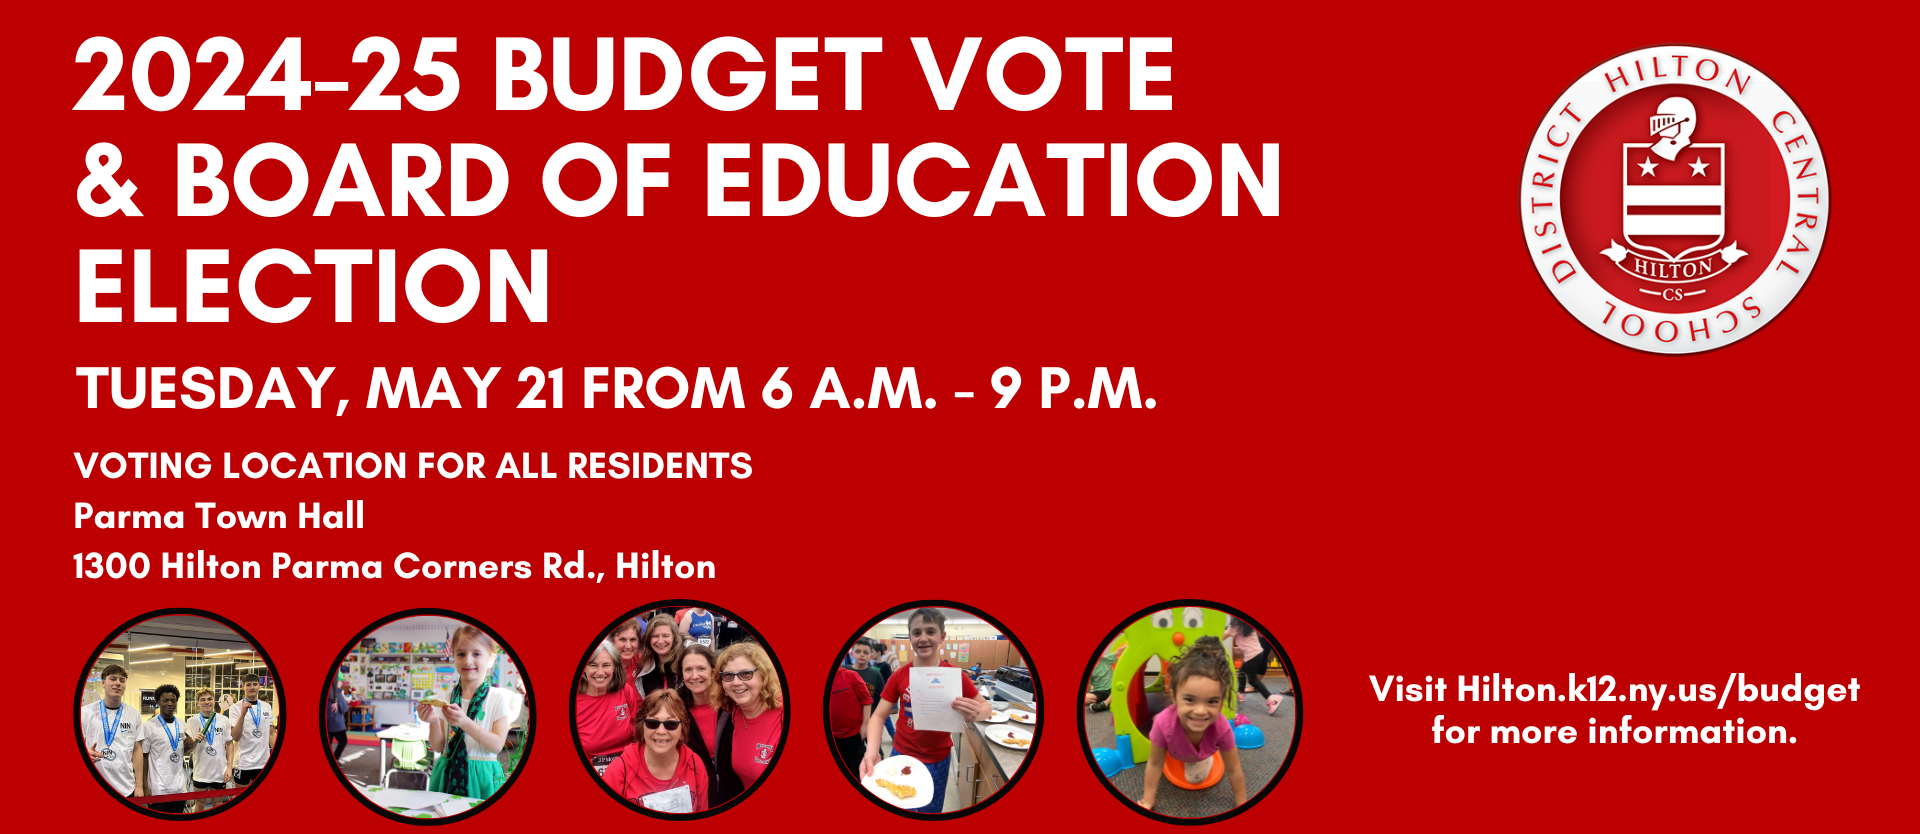 Budget Vote and Board of Education Election